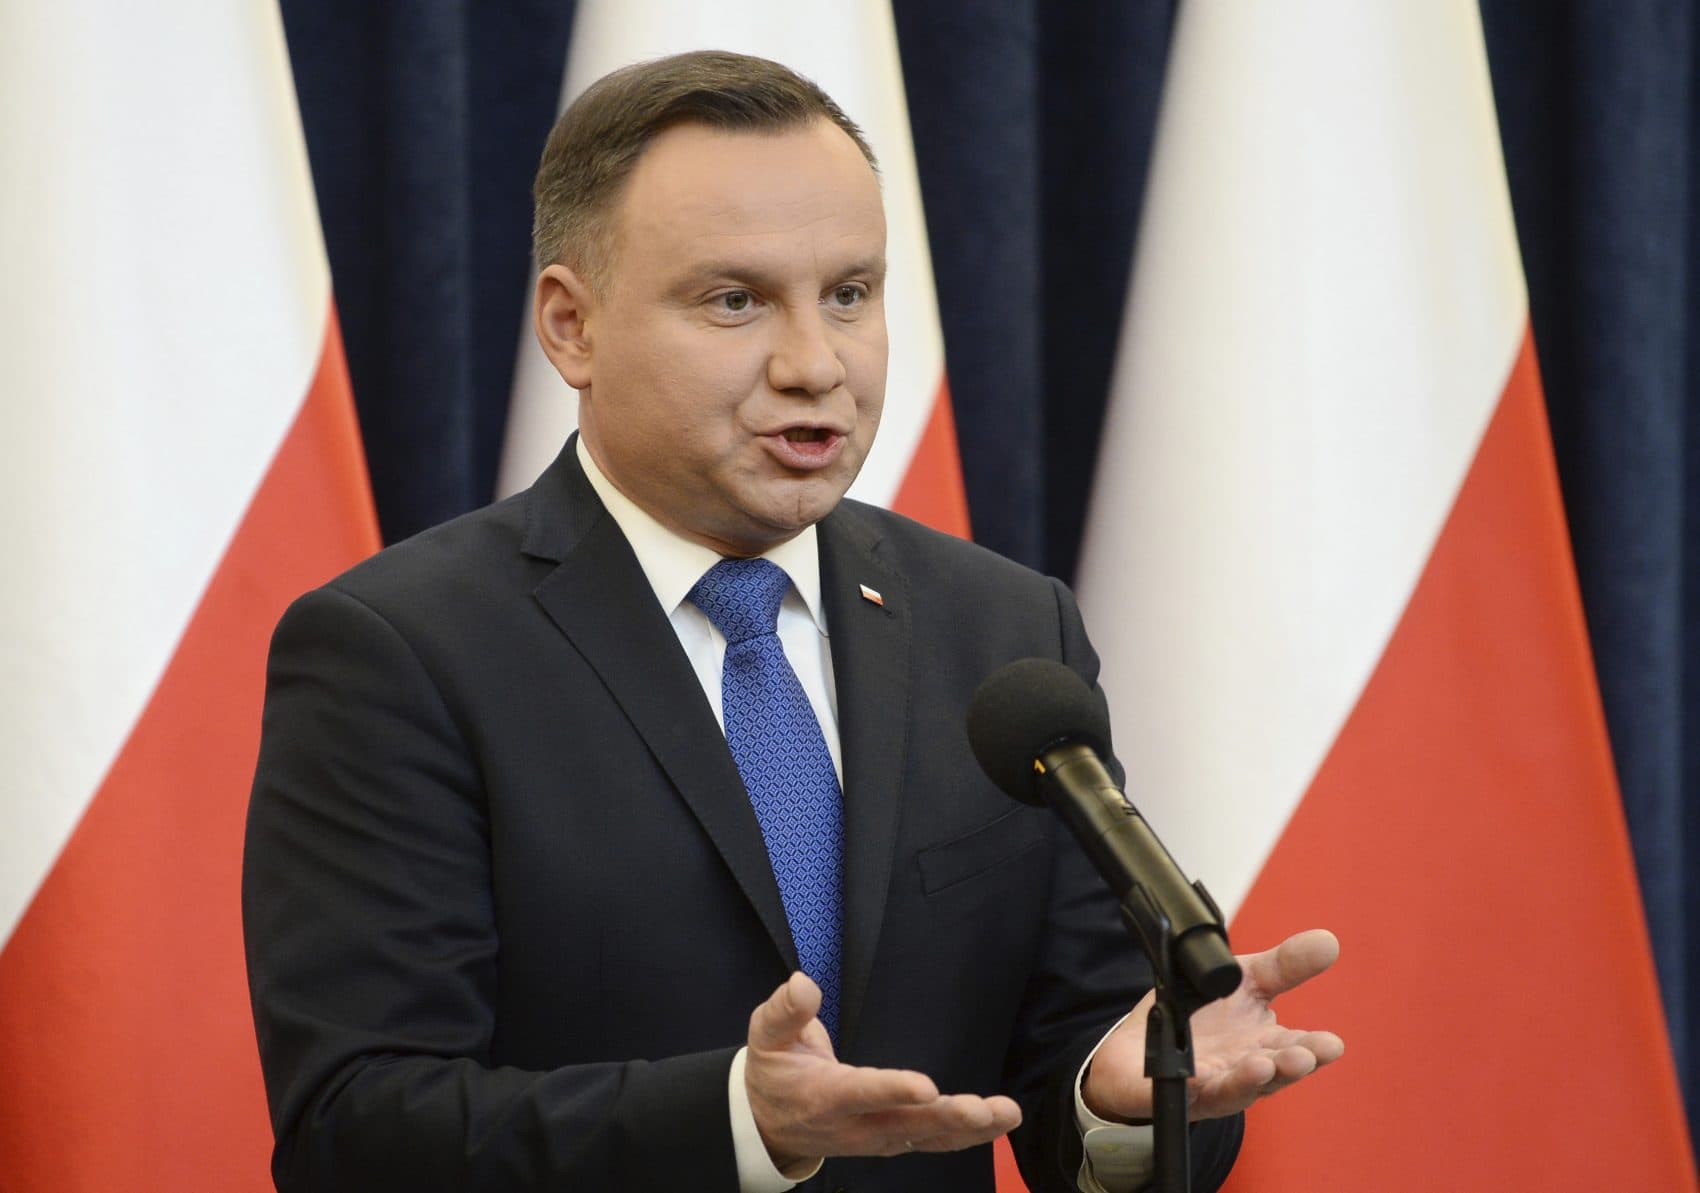 Polish President Andrzej Duda announces his decision to sign legislation penalizing certain statements about the Holocaust, in Warsaw, Poland, Tuesday, Feb. 6, 2018. Duda said that he will also ask the constitutional court to make final ruling on the disputed Holocaust speech bill. (Alik Keplicz/AP)